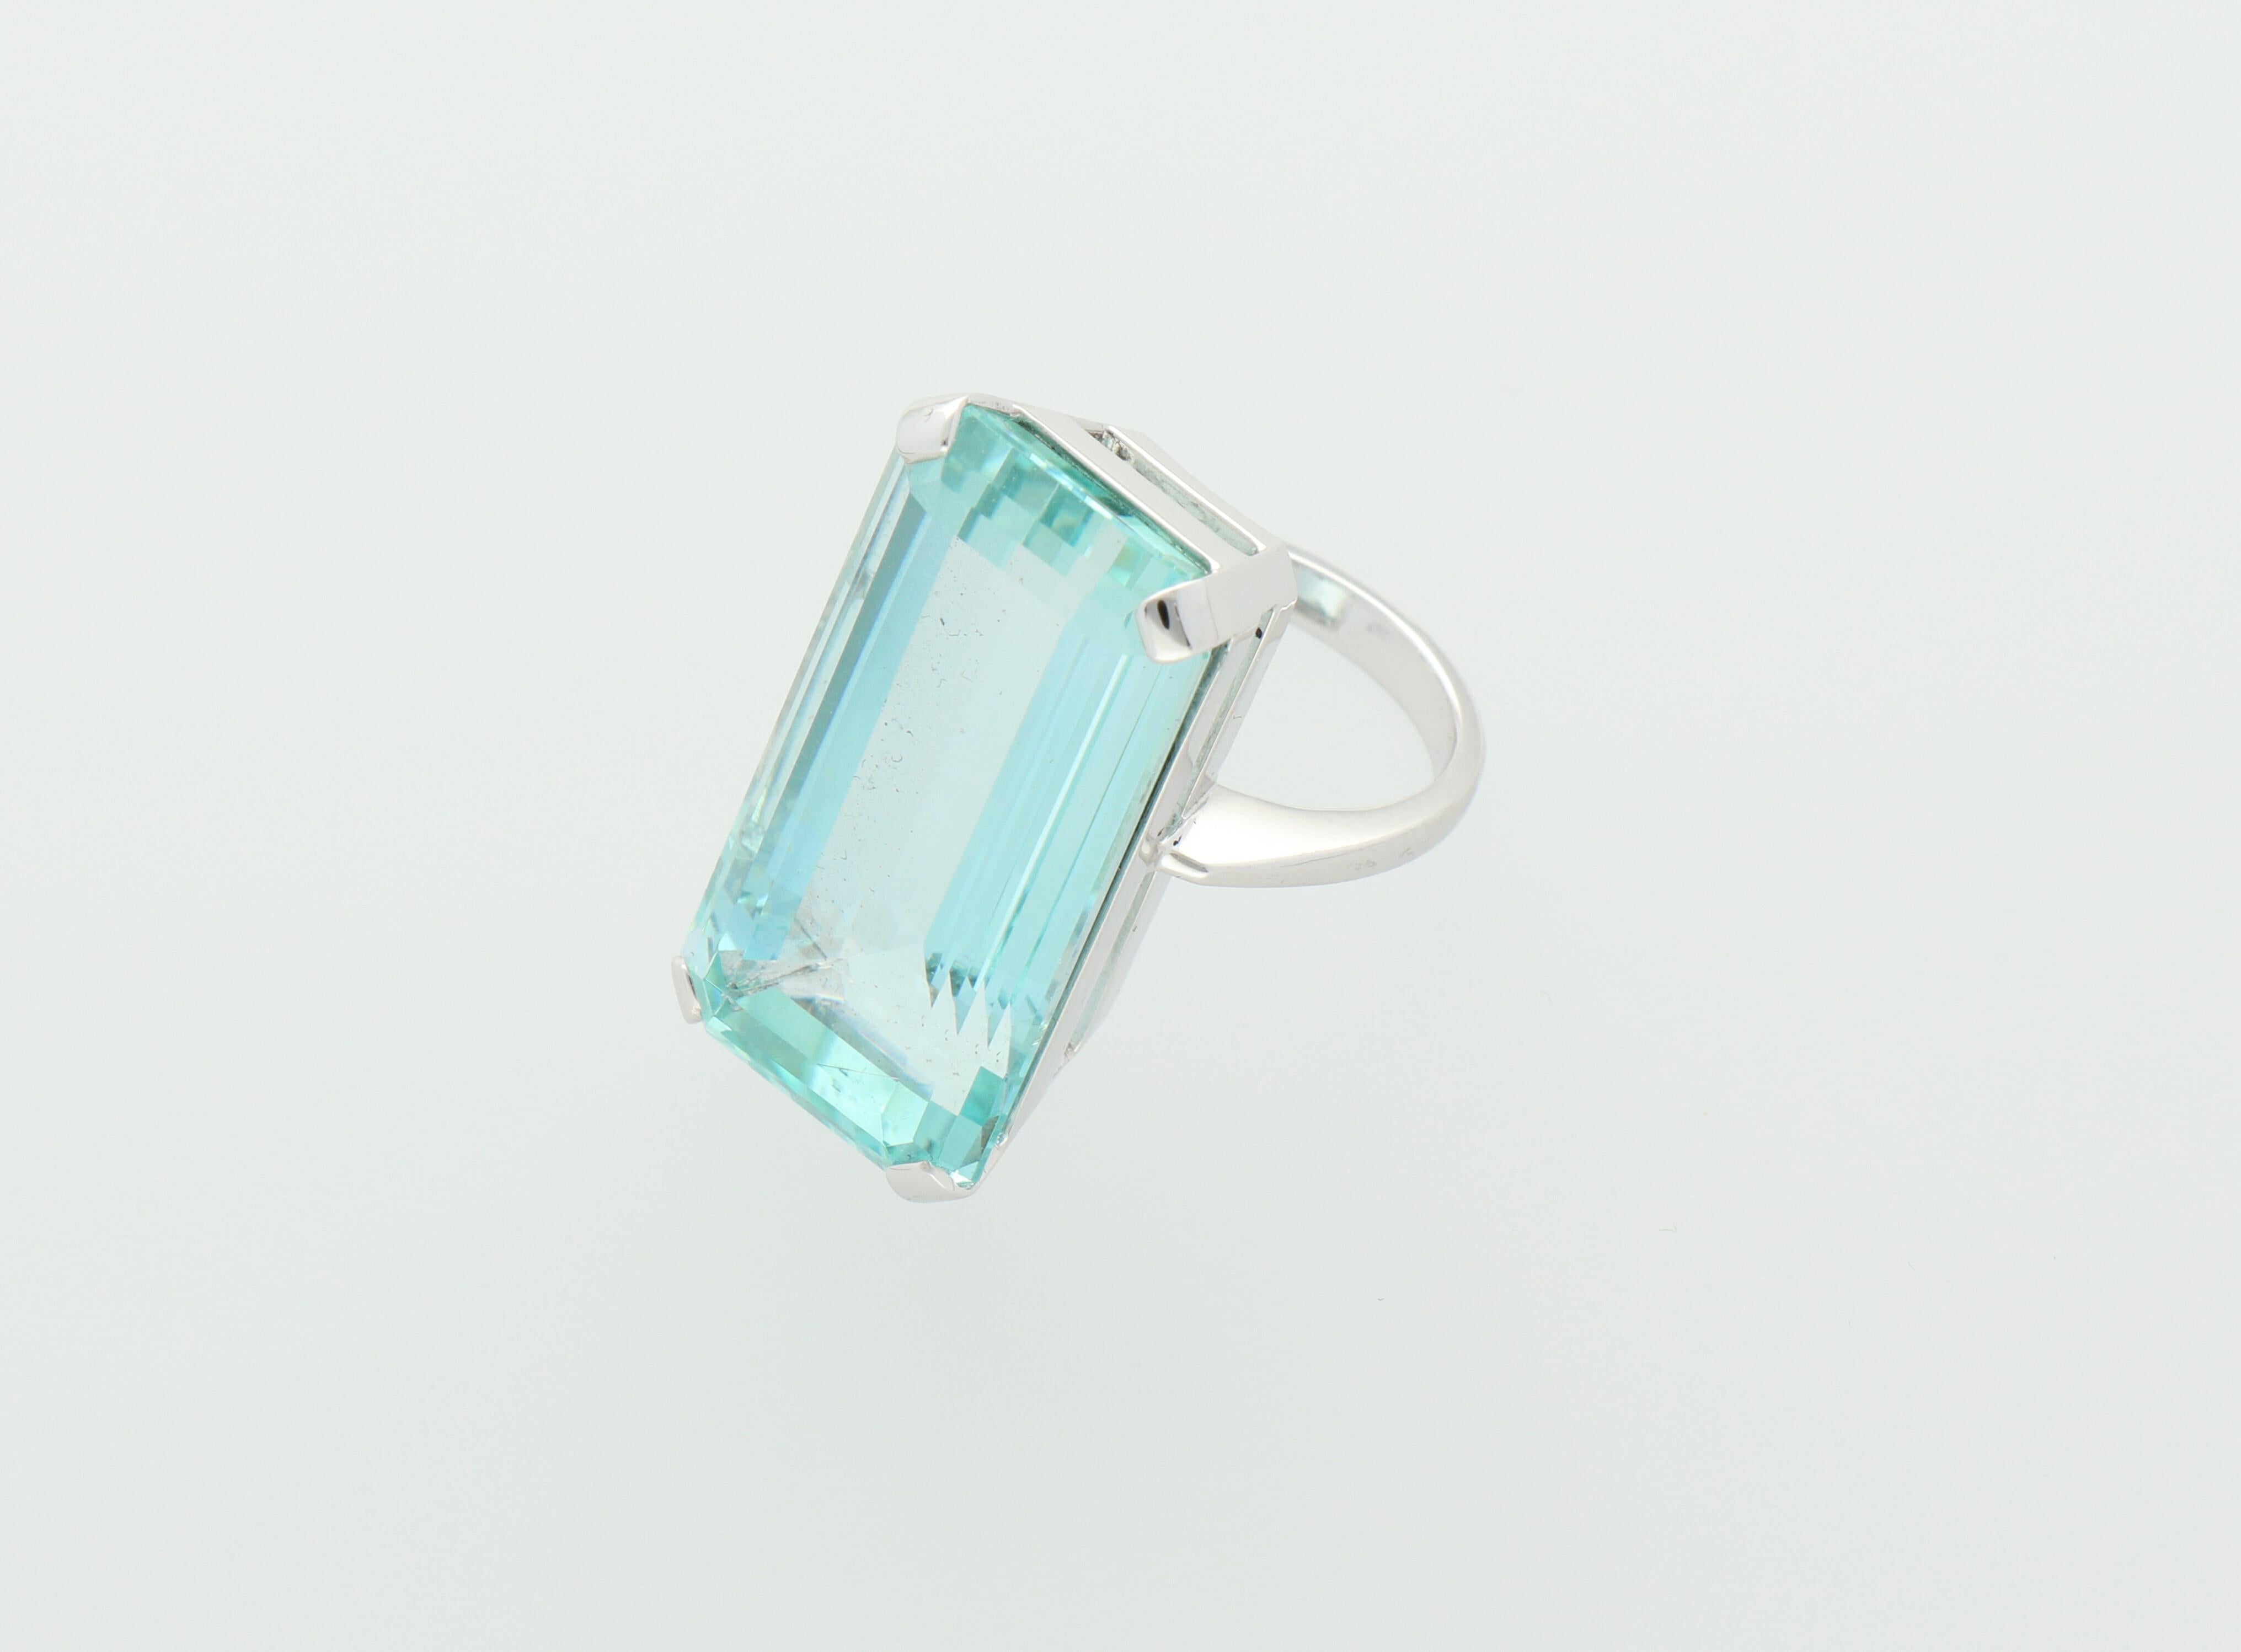 A beautiful blue colour emerald cut Aquamarine, weighing 38.4 carats,  mounted in 18K white gold cocktail ring.

Size METRIC 54 AMERICAN 7
Components:
18K white gold - 10.7 grams
Aquamarine - 38.4 carat
